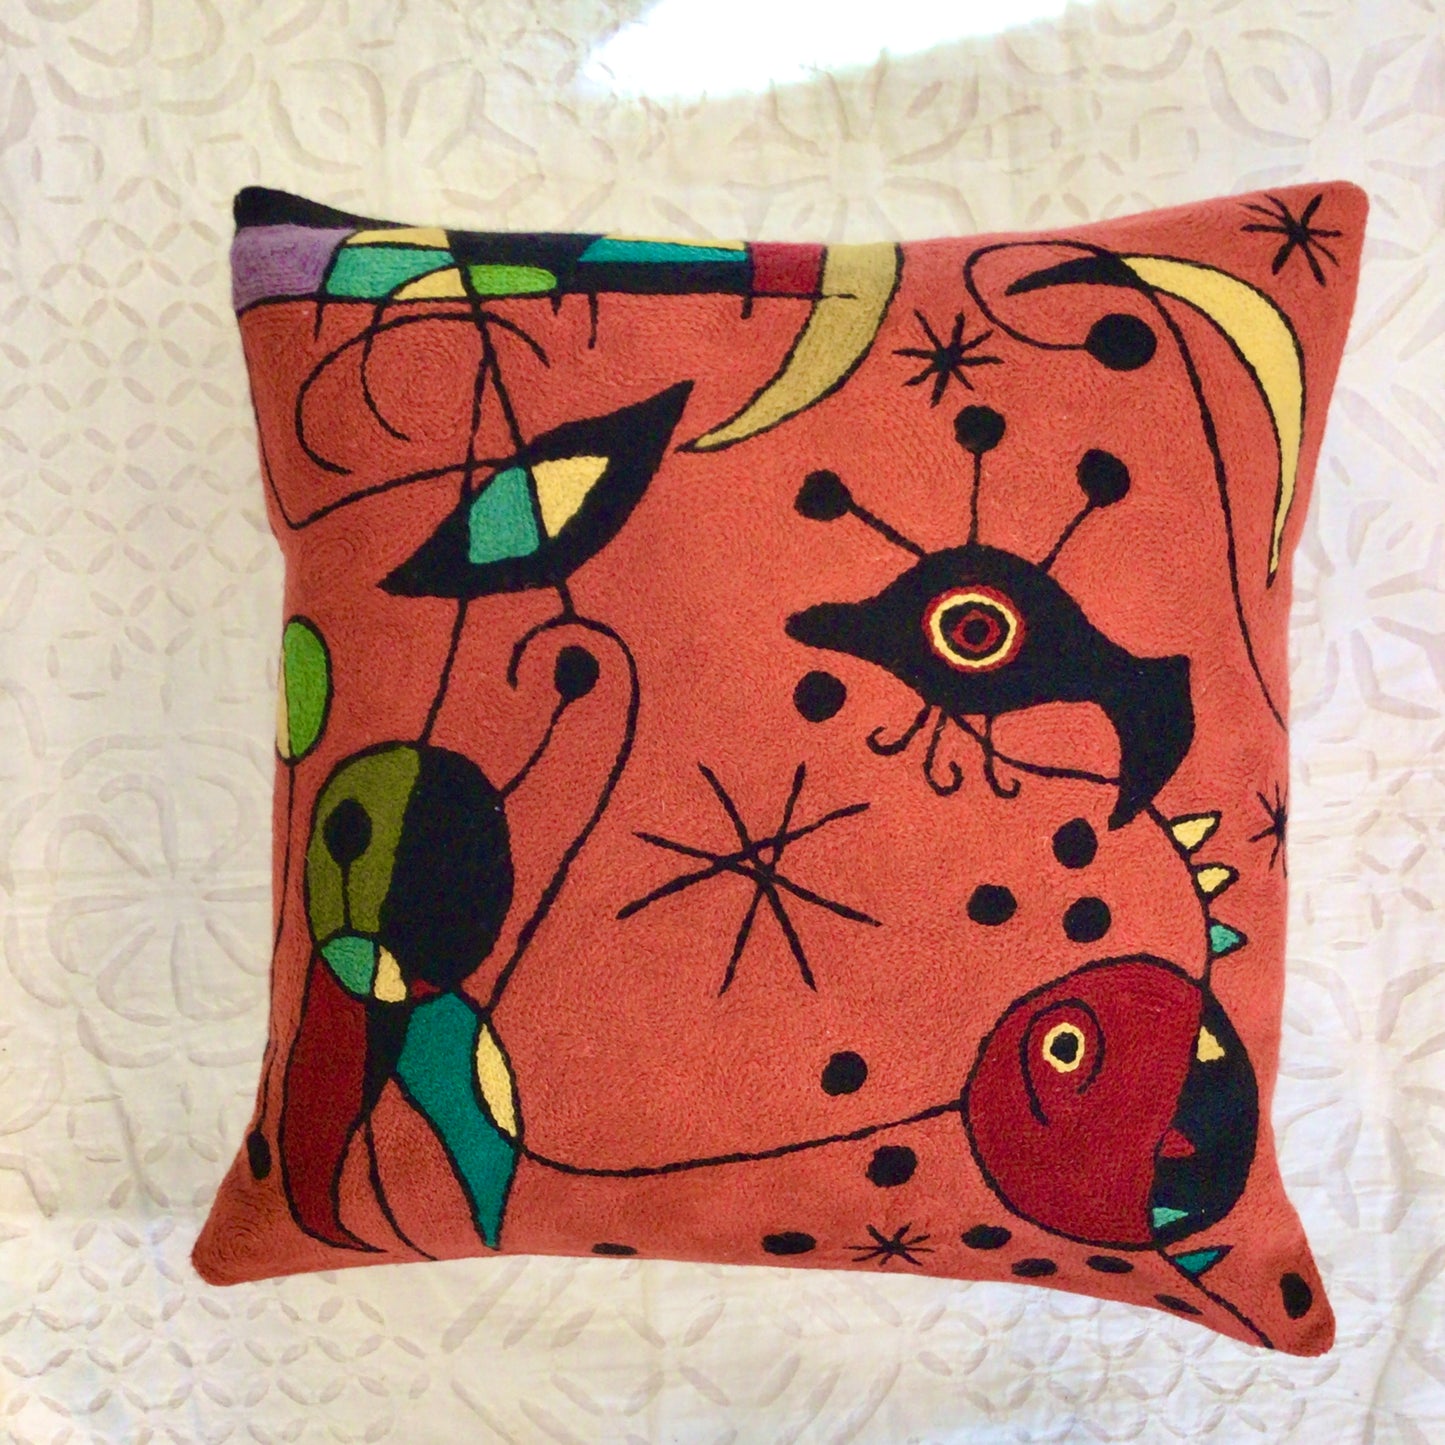 Miro Kite Flying Red Chainstitch Pillow